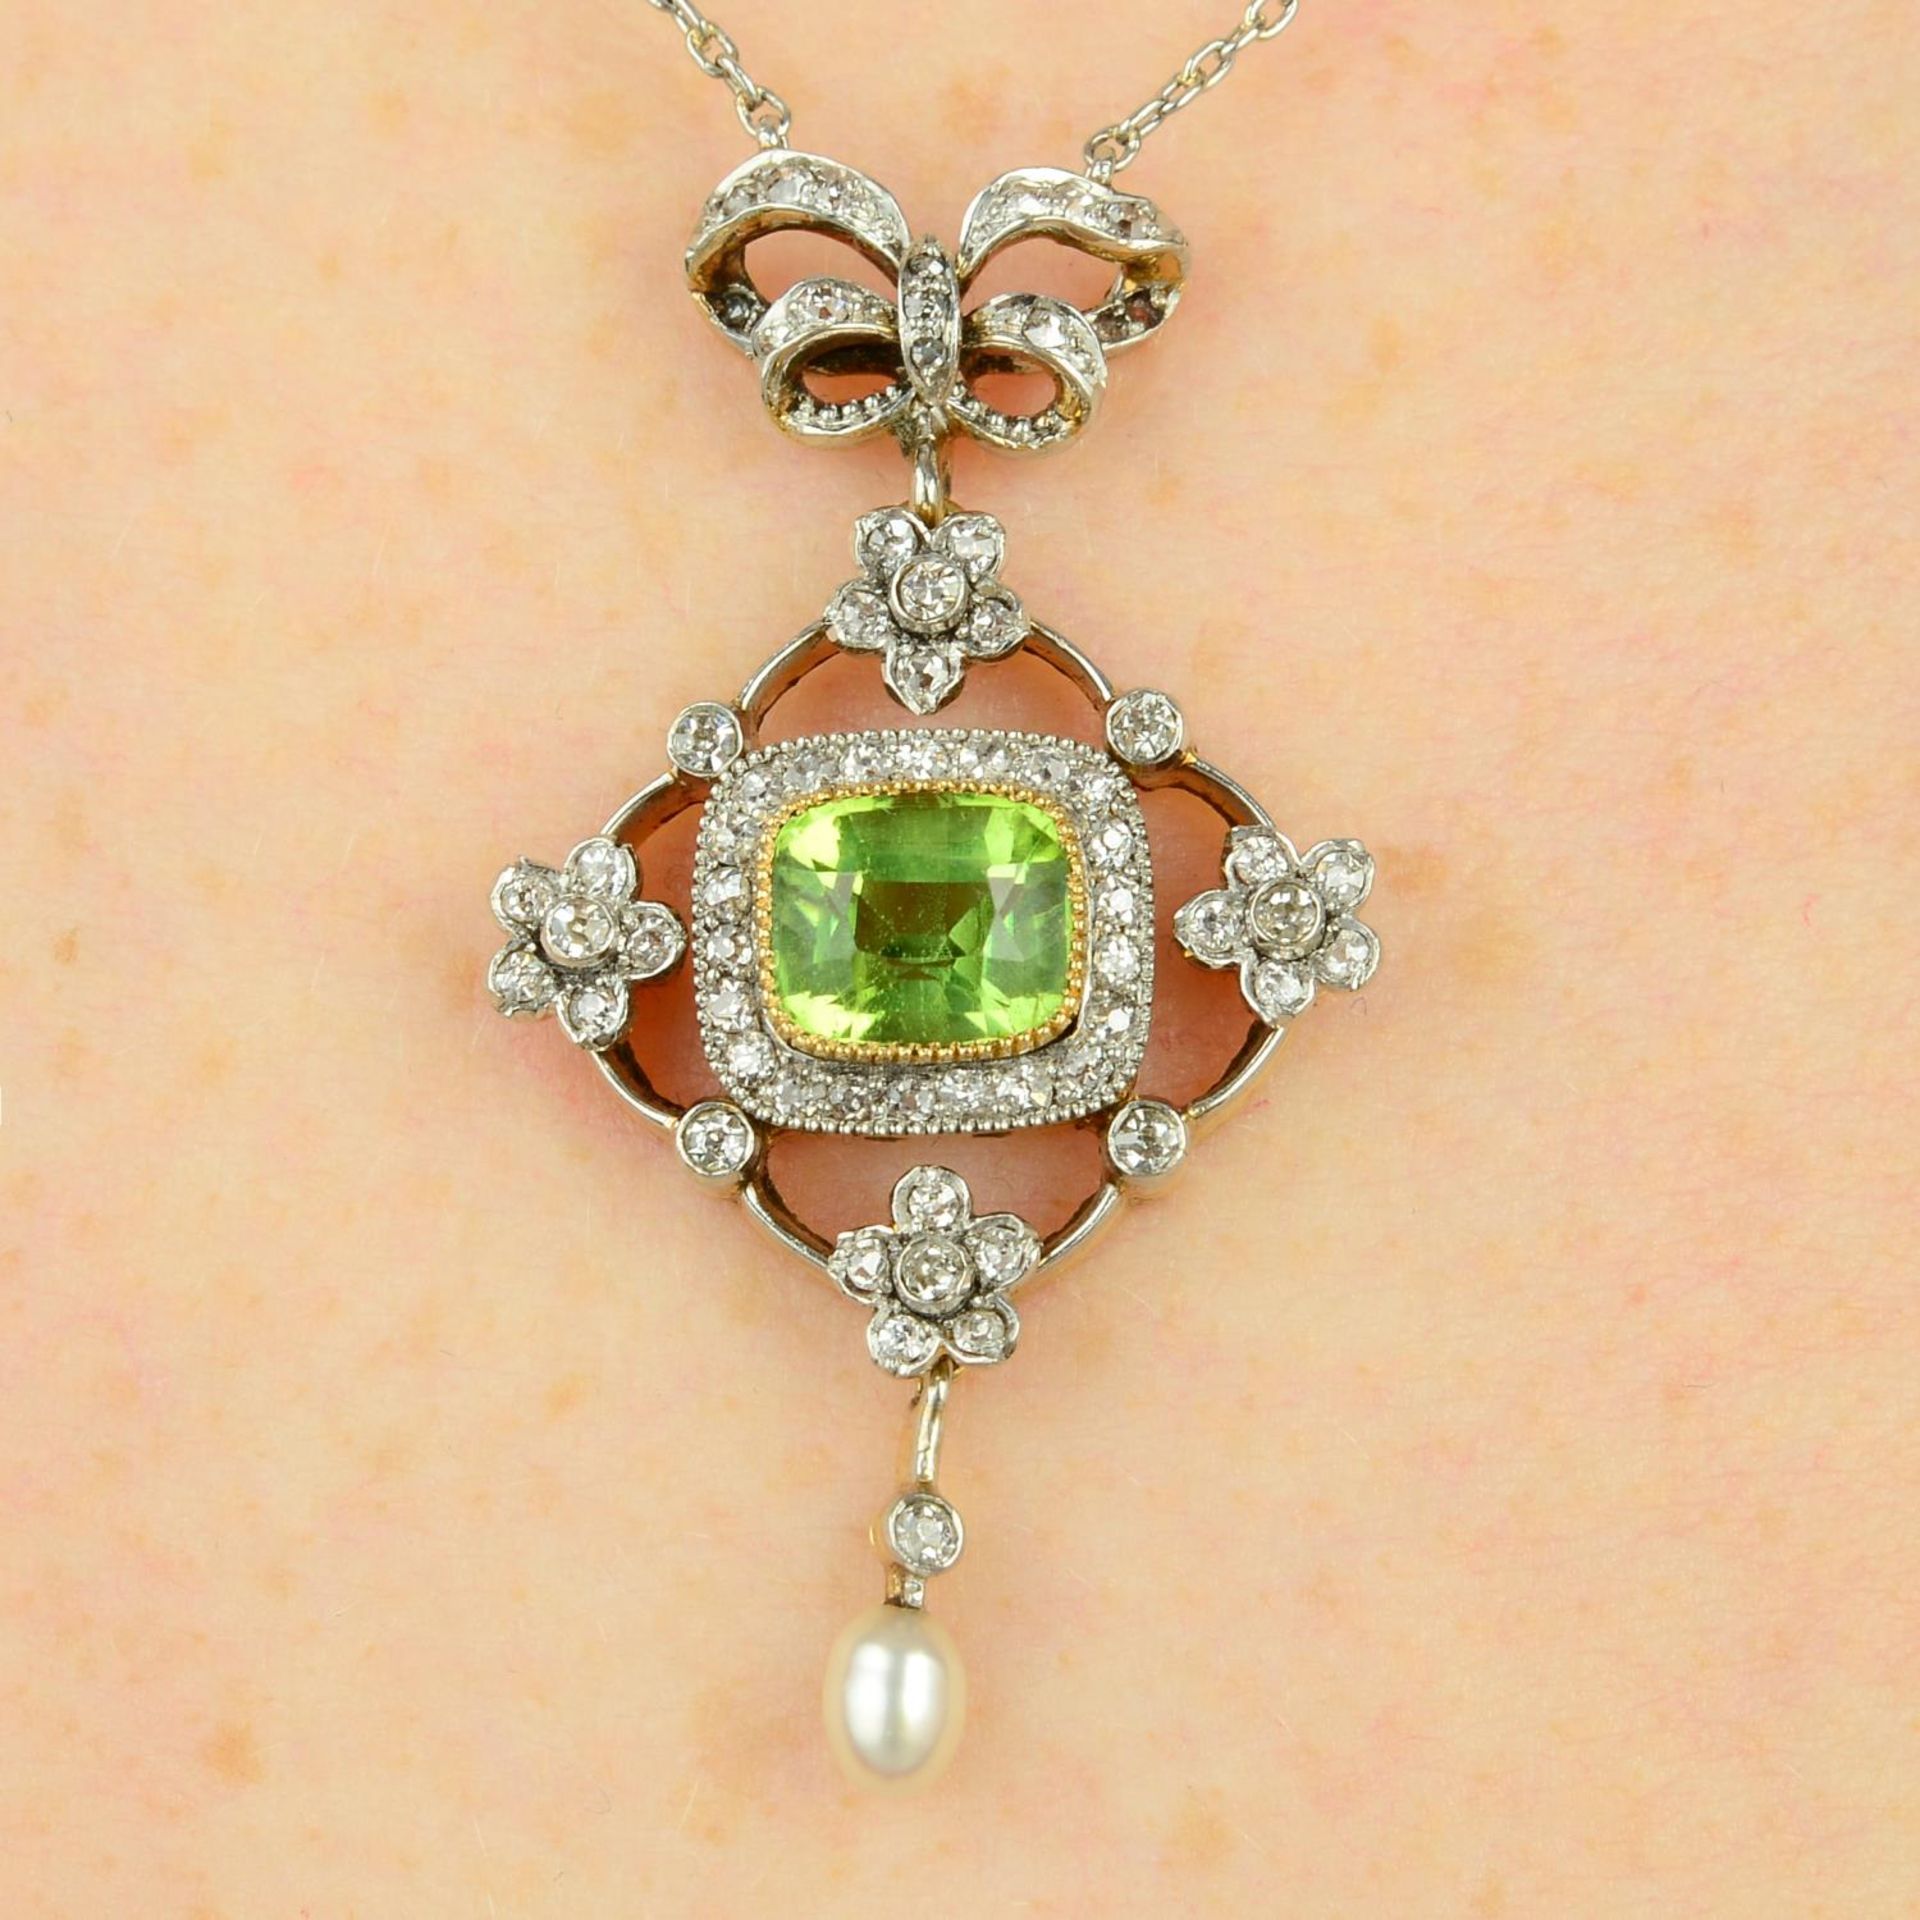 An early 20th century platinum and gold, peridot, old-cut diamond and pearl pendant, on chain.